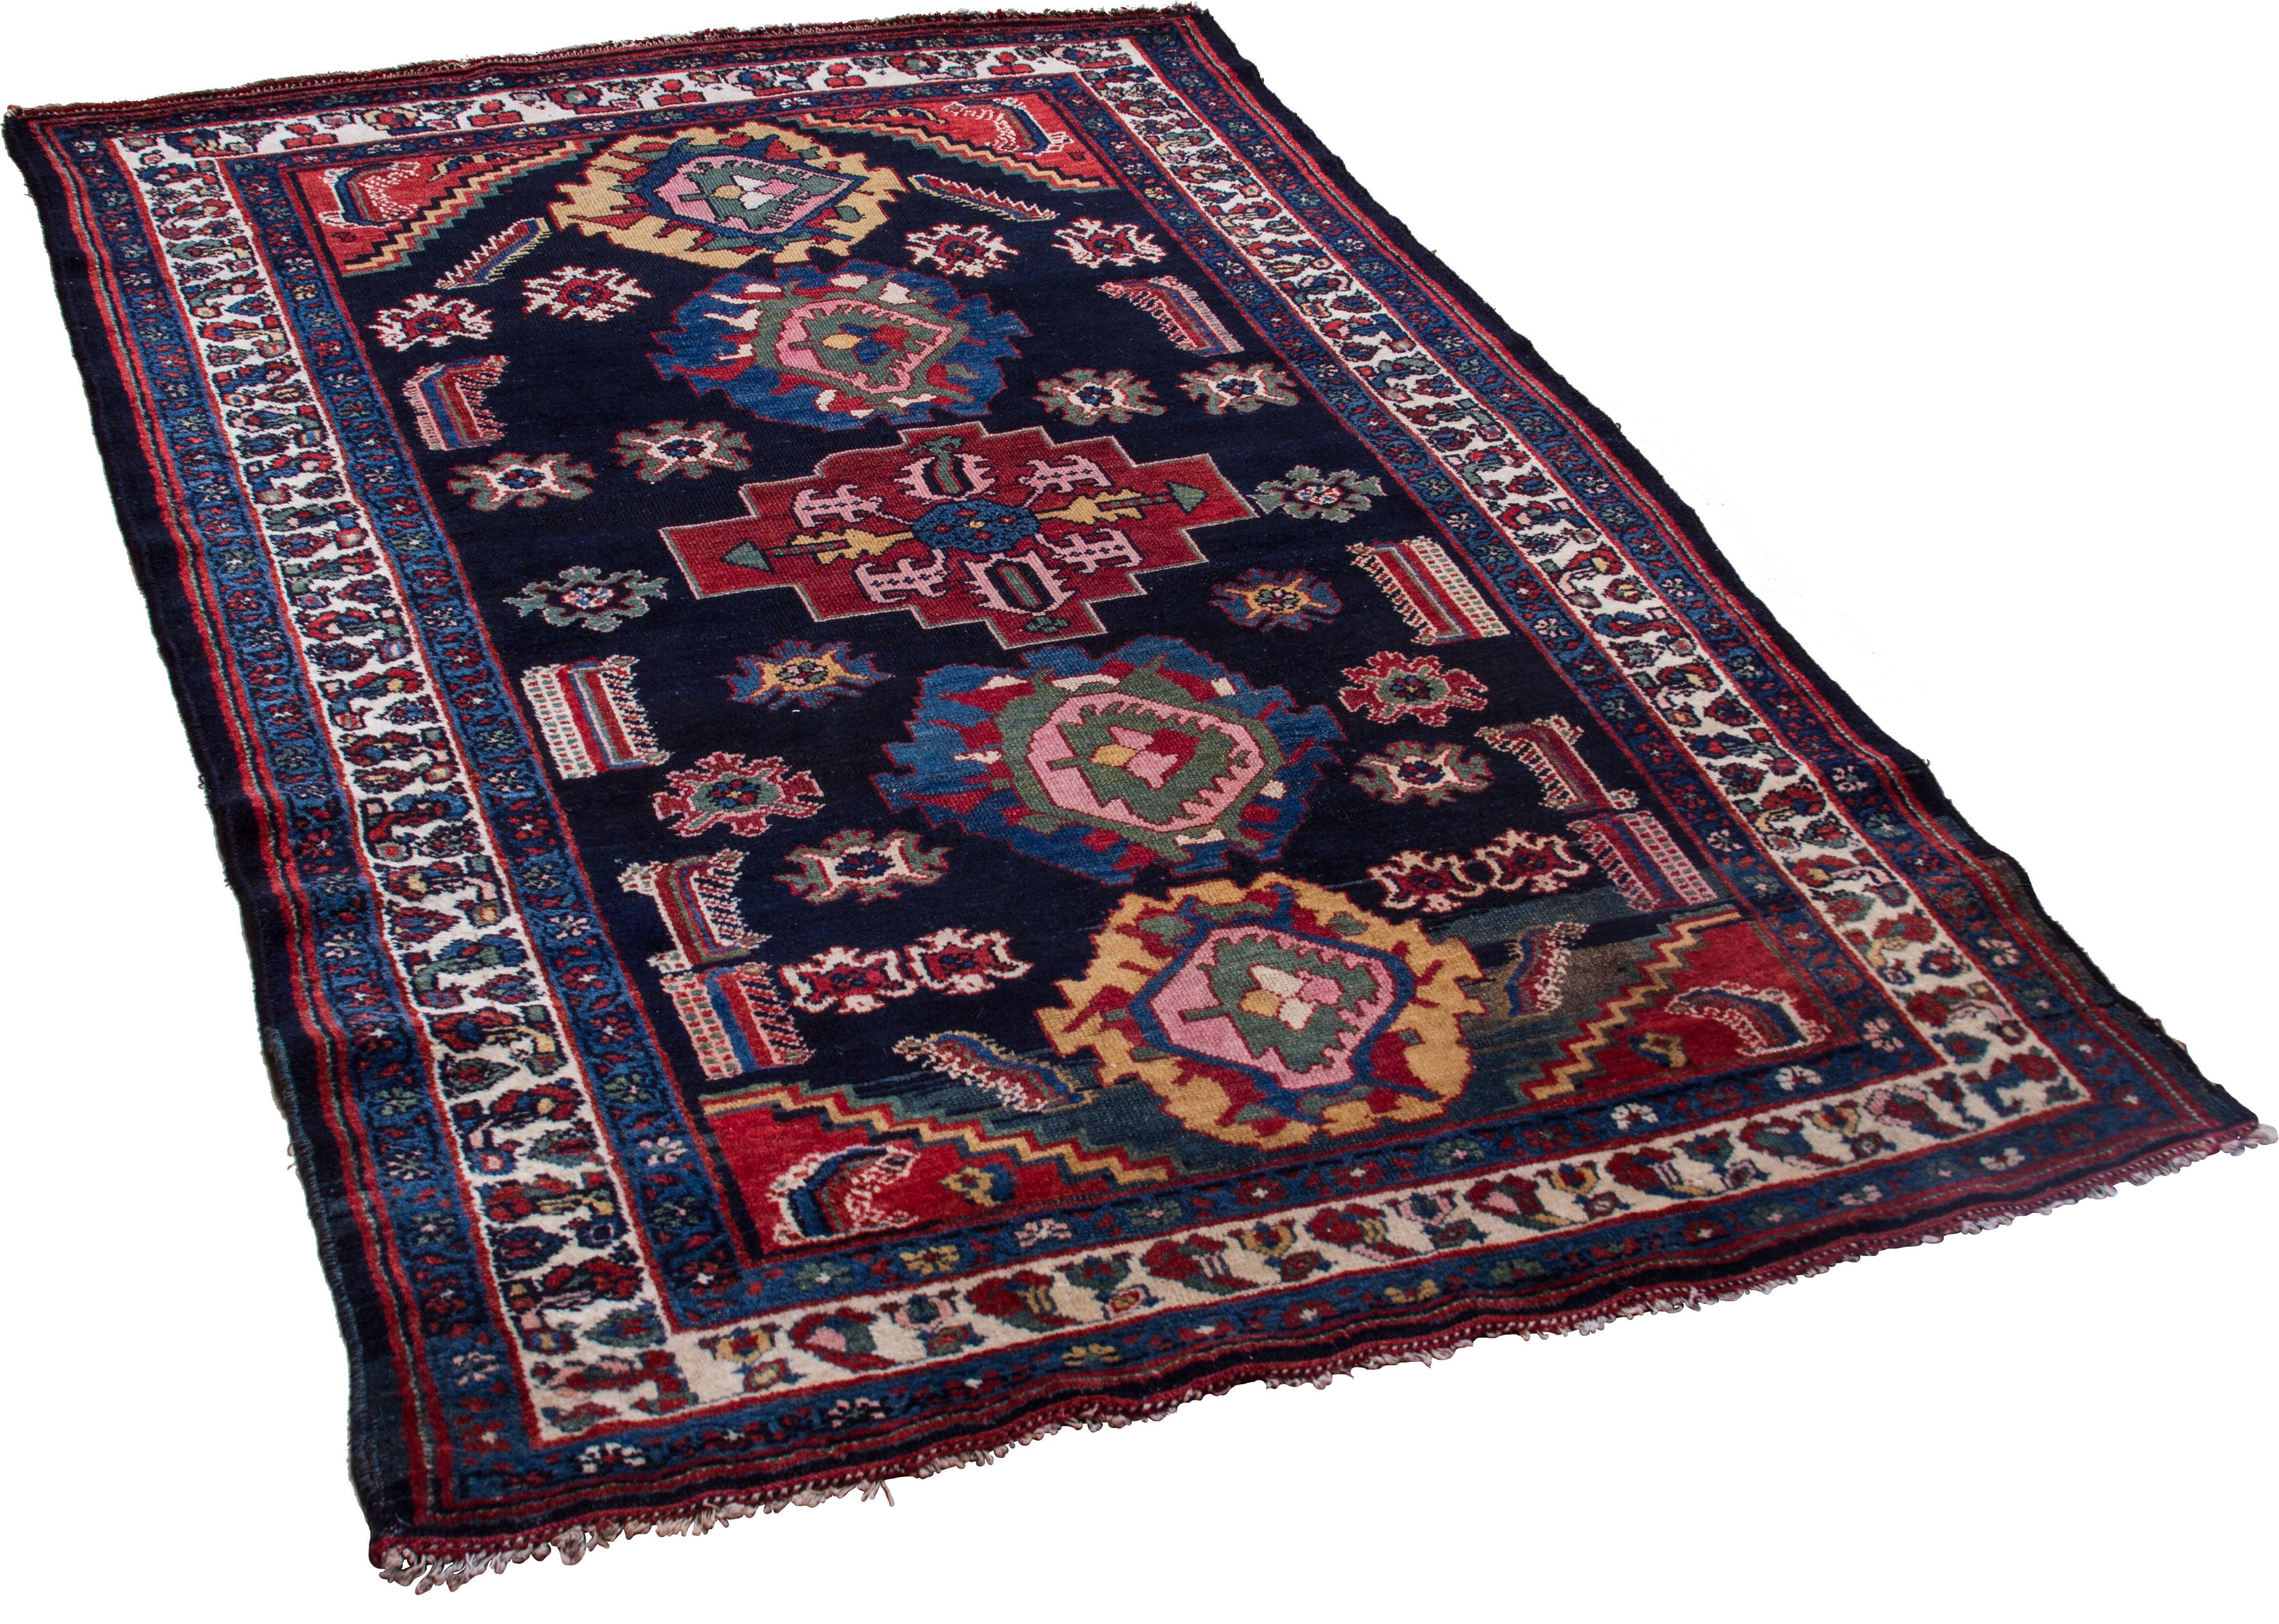 Excellent for its condition and age. Bakhtiari, also known as Bakhtyari, rugs are well-known for their vibrant colors. Wonderful greens and blues are shown in vibrant colors and design.
Handwoven by the Bakhtiari tribe, in Chahar Mahaal and